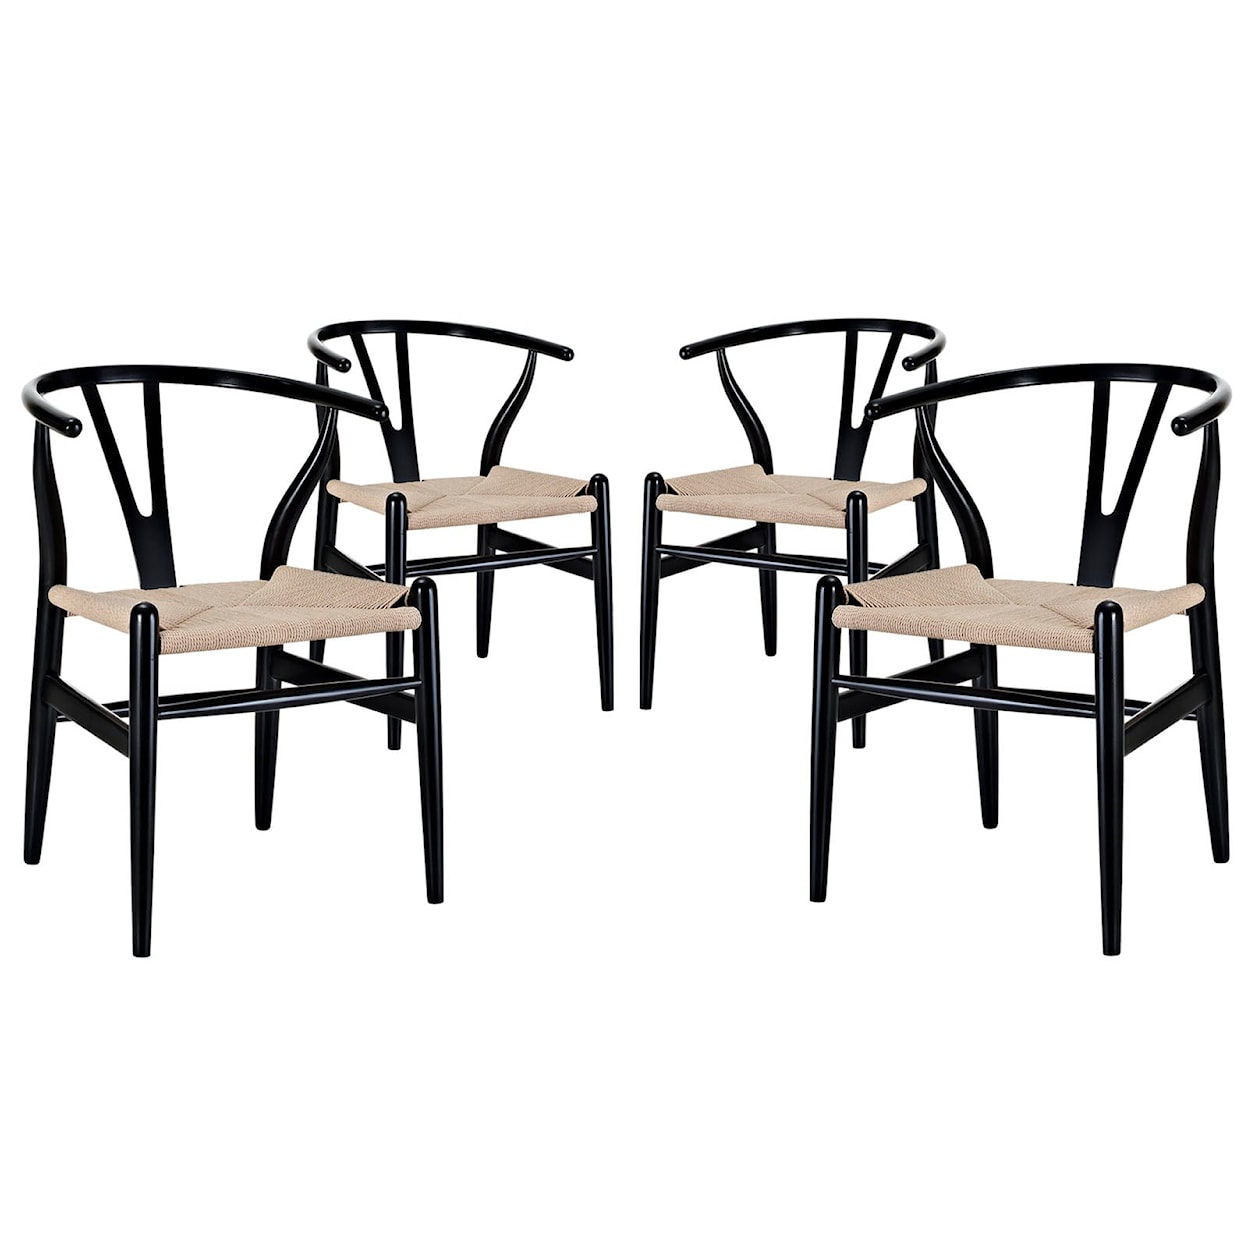 Modway Amish Amish Dining Armchair Set of 4